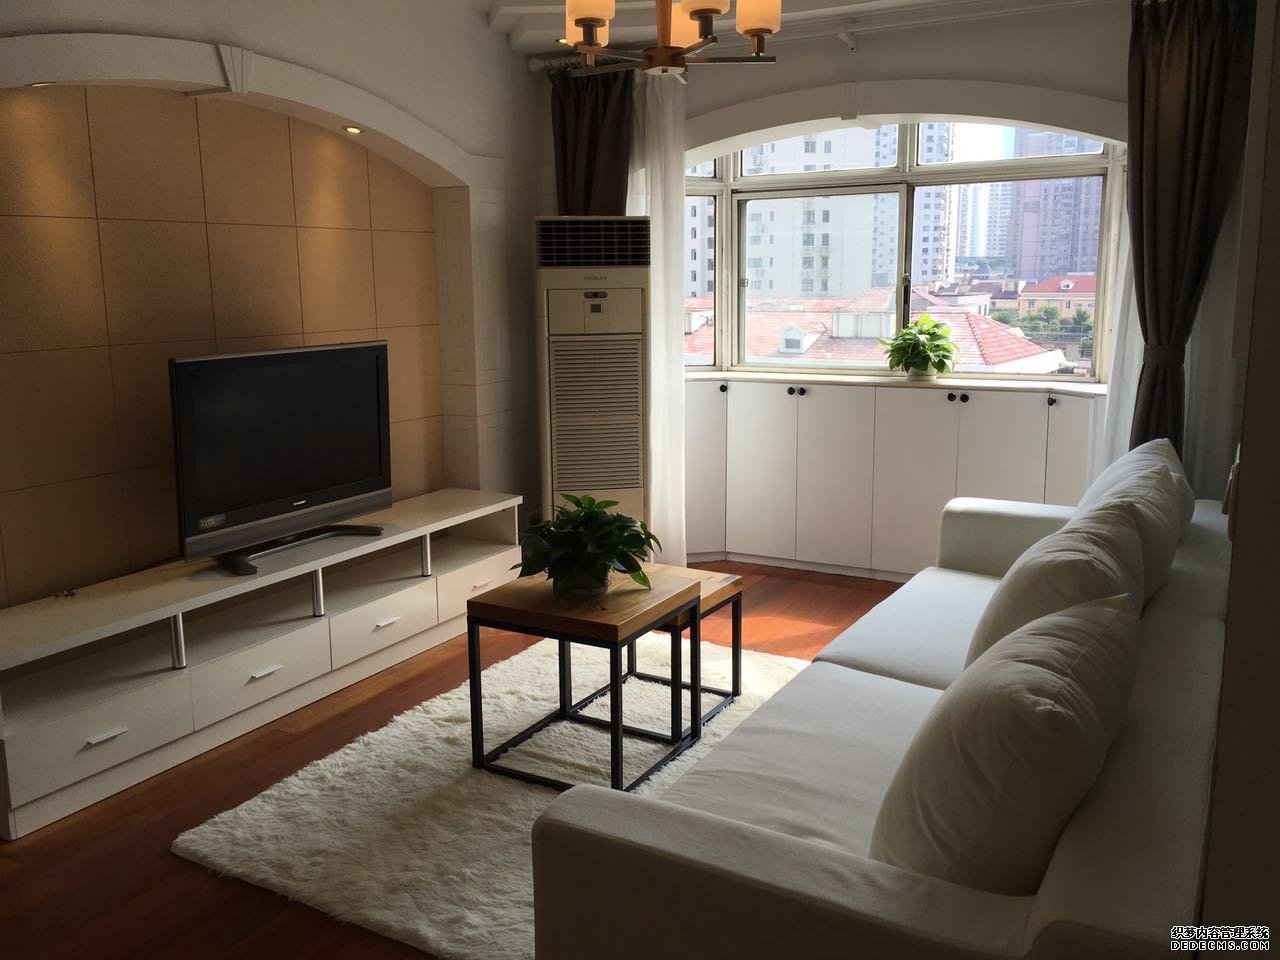 Shanghai cheap apartment Well-priced 3BR Apt in Jingan, 500m to Line 7